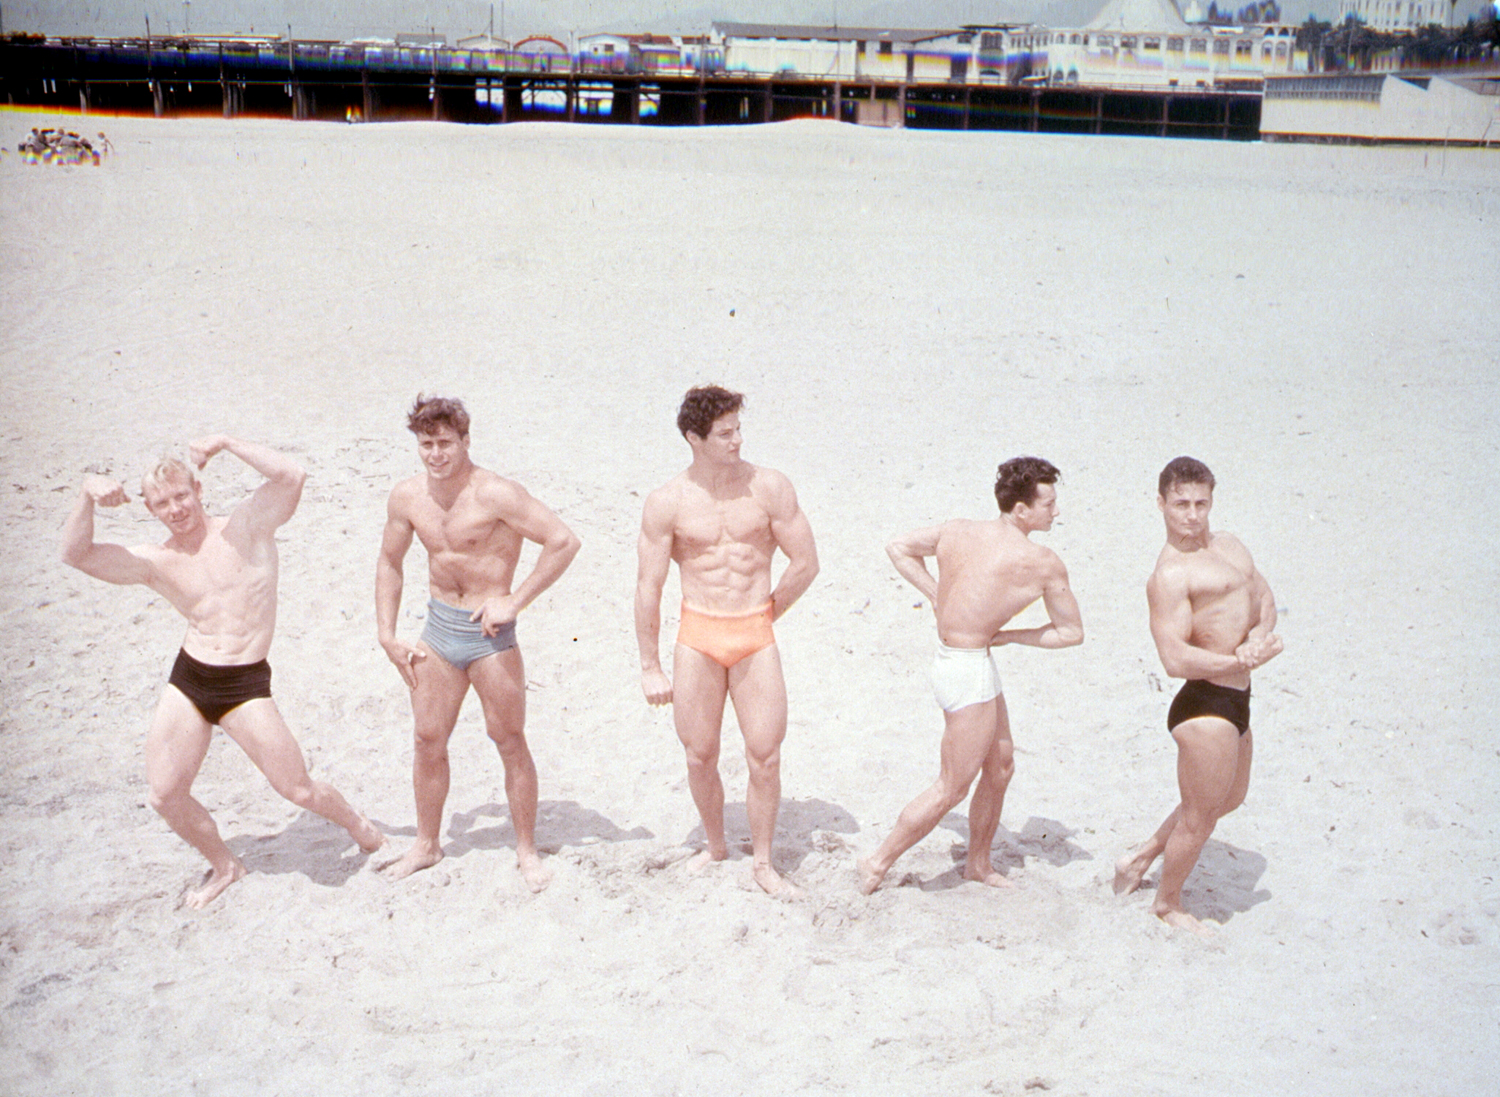 Flexing their muscles for their mutual admiration and for that of passers-by, these California youths find the days go fast on Muscle Beach at Santa Monica.